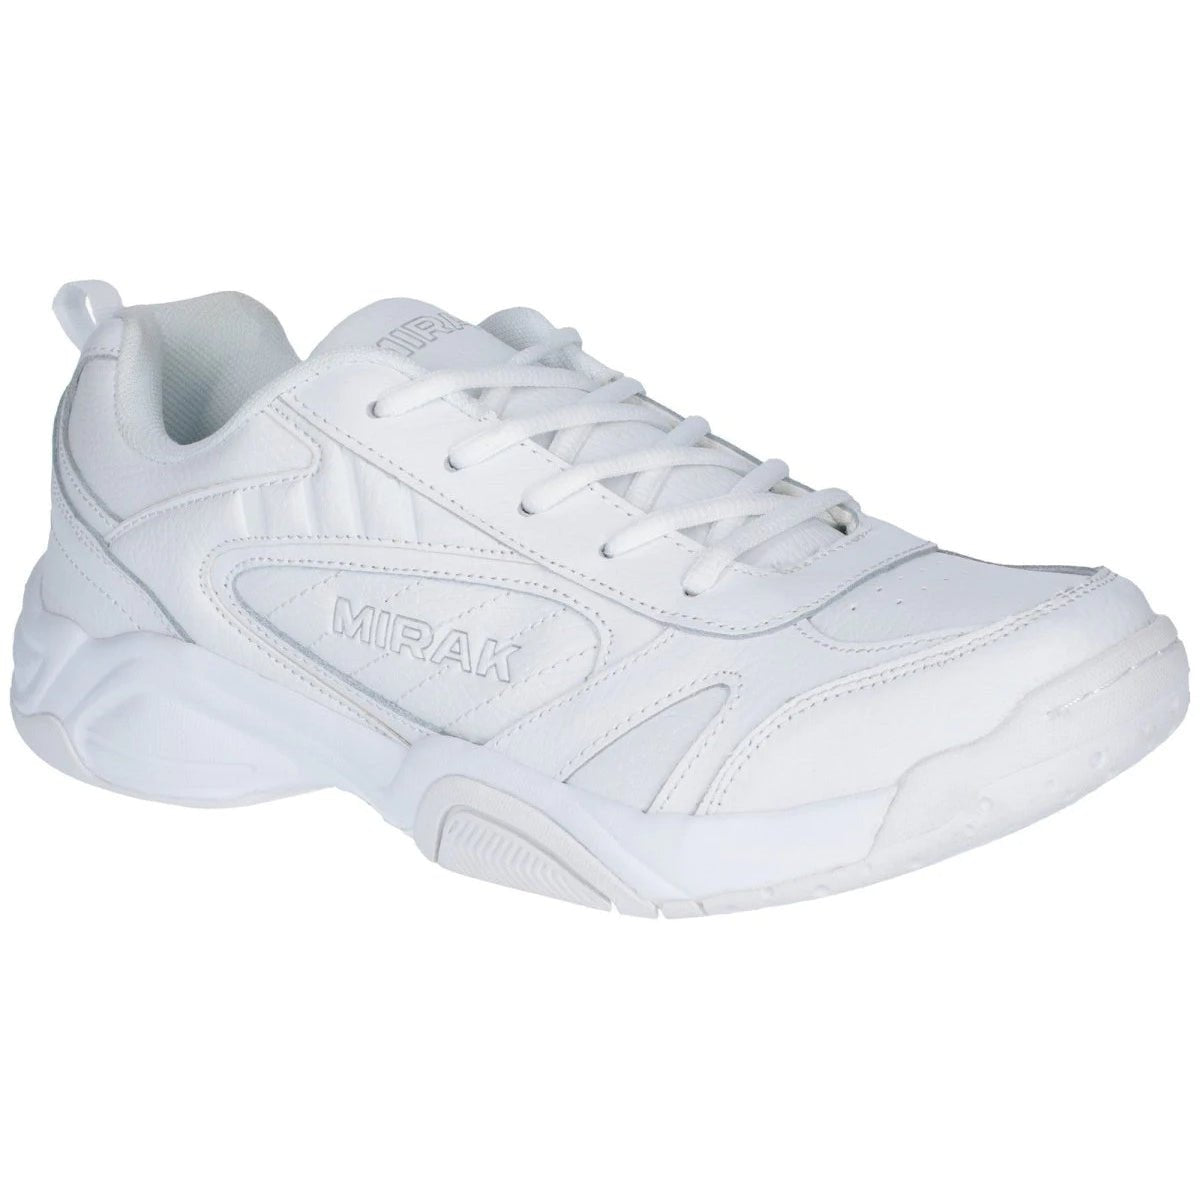 Mirak Contender Kids Lace Sports Trainers - Shoe Store Direct